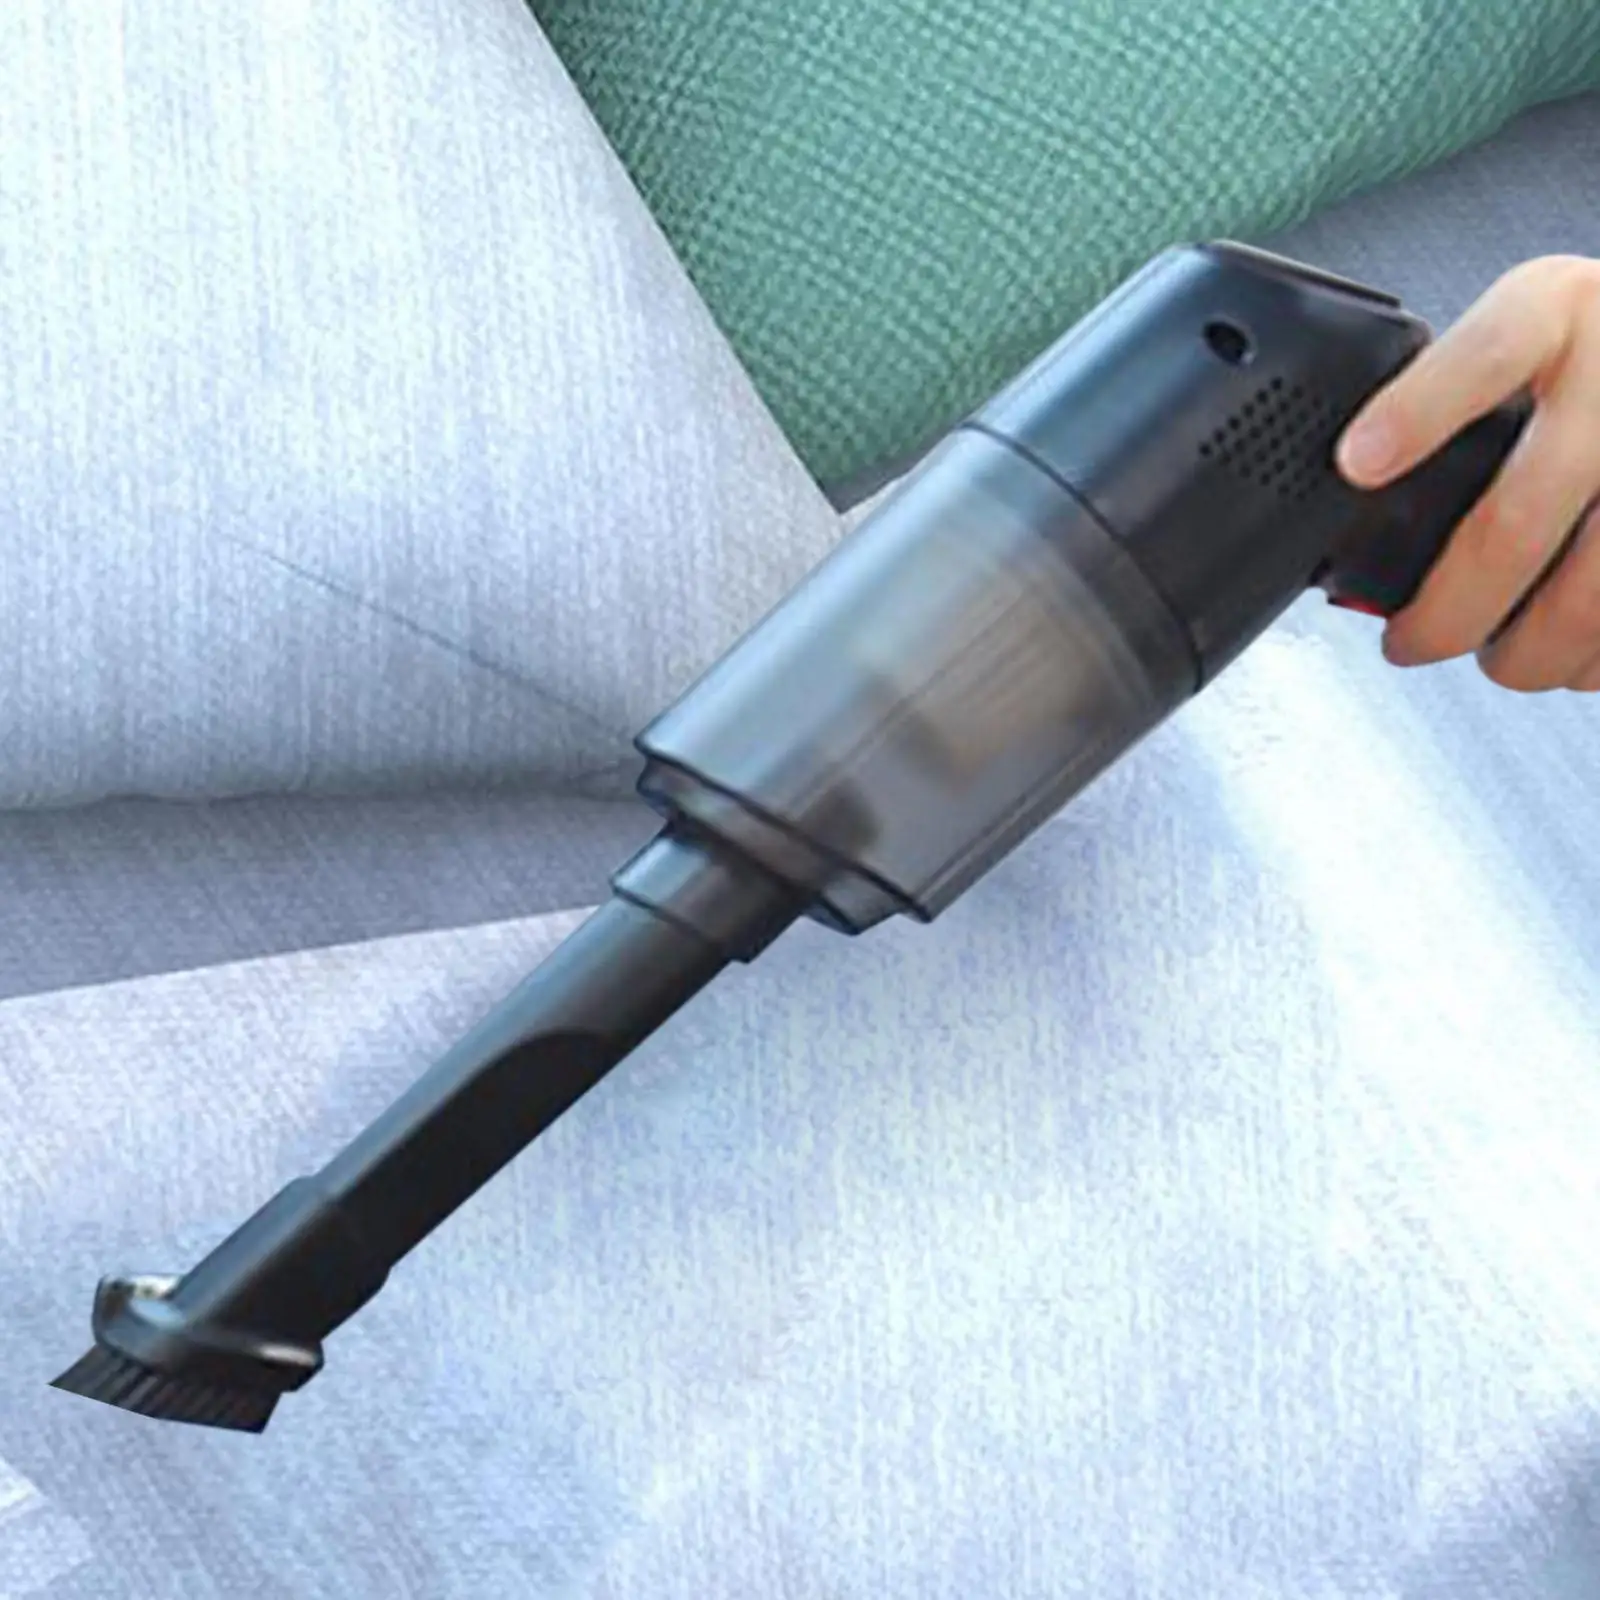 Portable Car Vacuum Cleaner Mini High Power Lightweight for Office Household Car Home